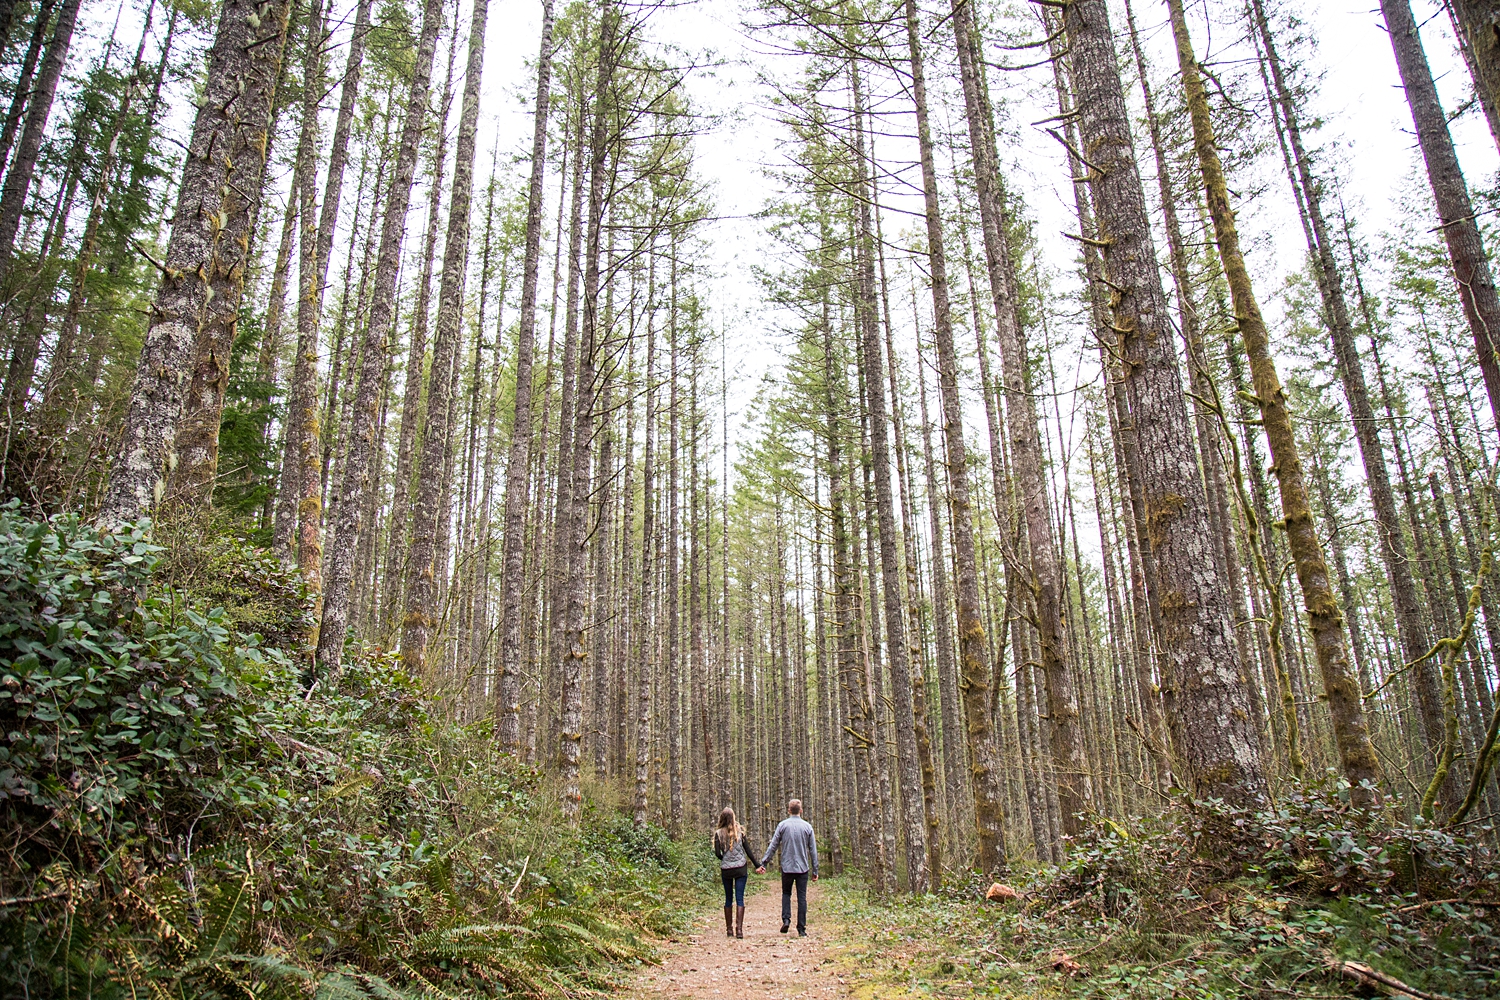 How to personalize your engagement pictures: go somewhere iconic to where you live, like in the forests of Washington state.